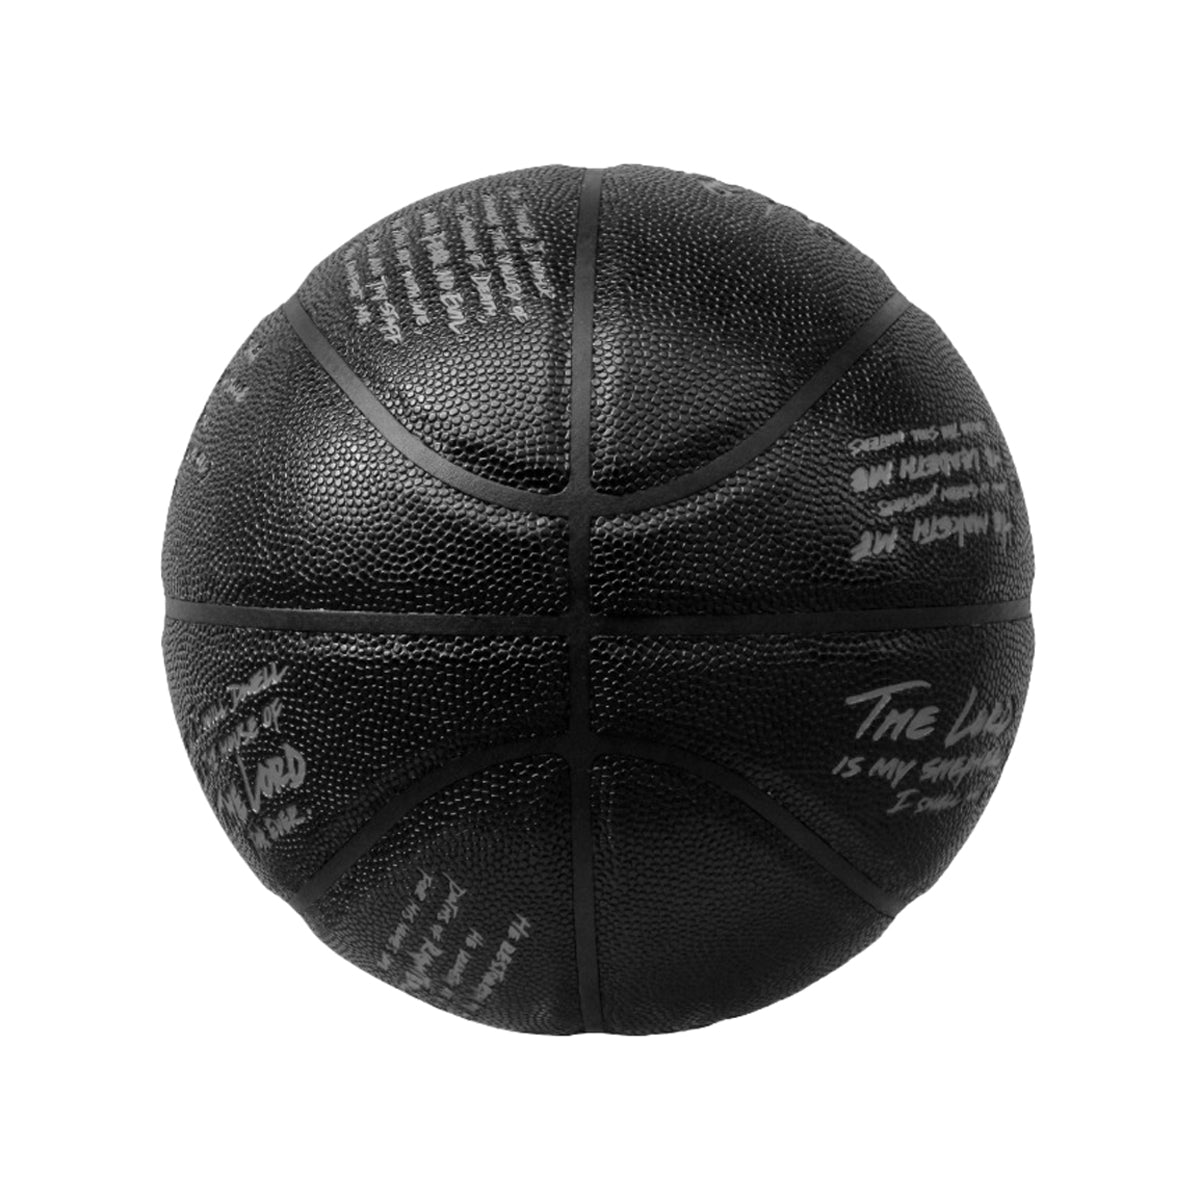 Psalm 23 Basketball - Limited Edition